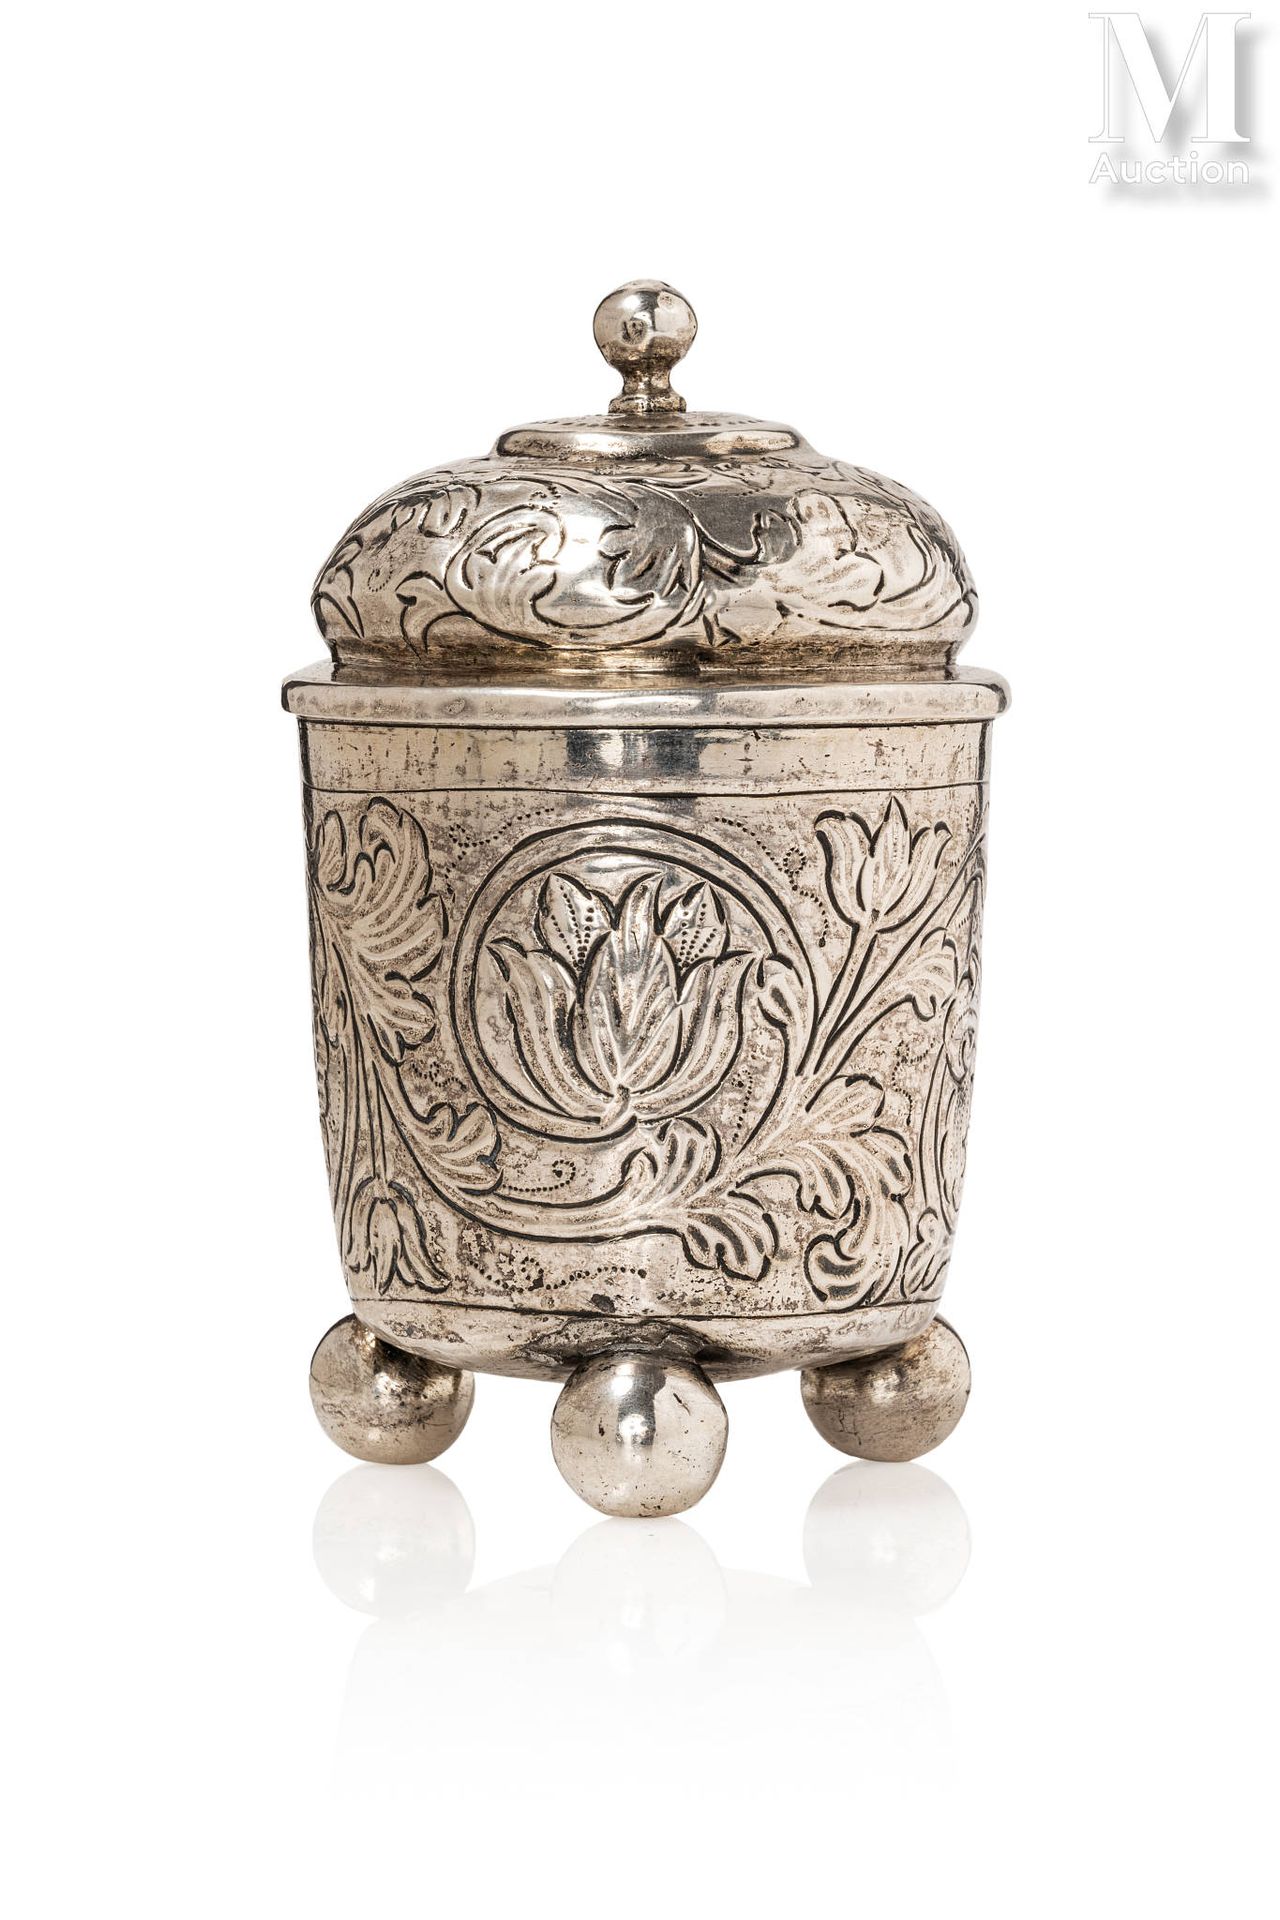 TIMBALE Tripod silver cover 84 zolotniks (875 milliemes) with engraved decoratio&hellip;